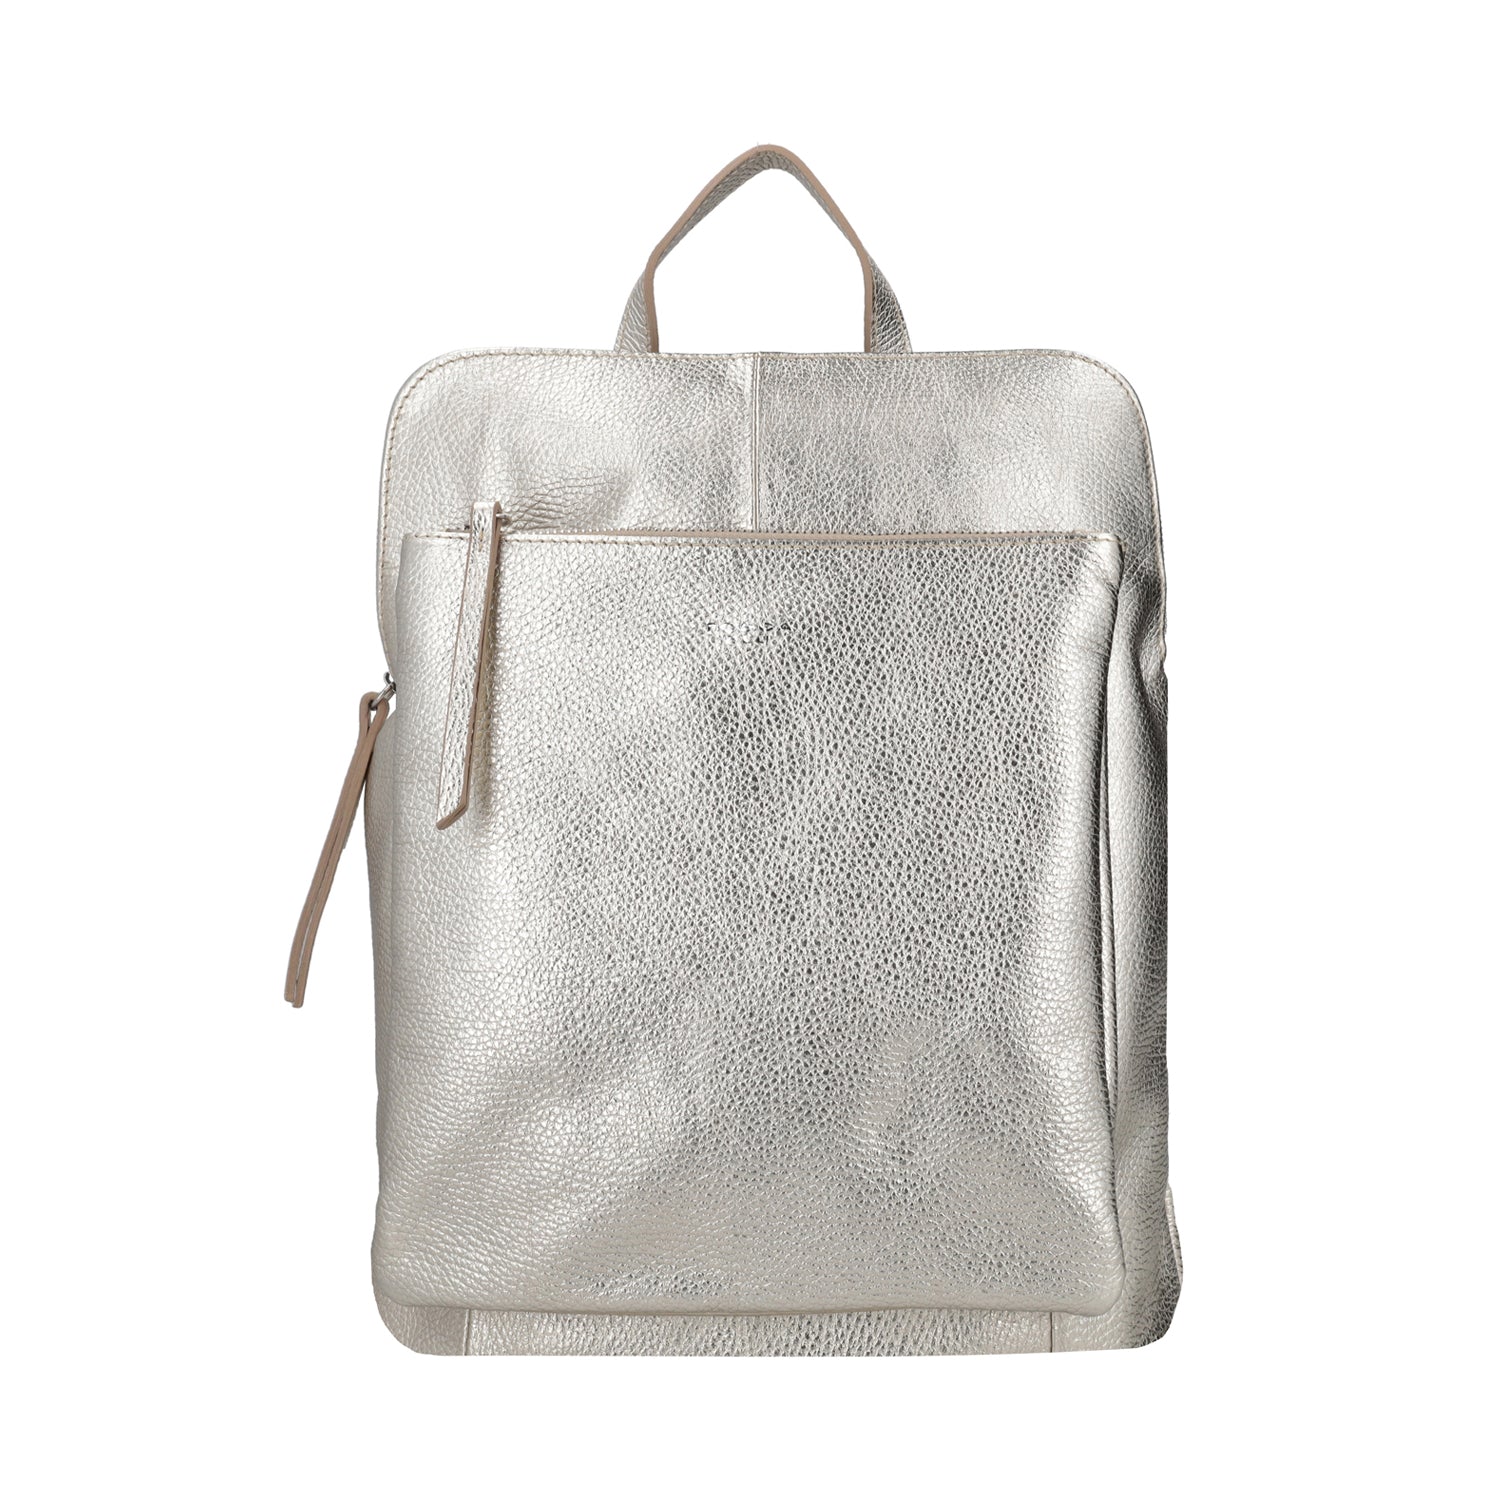 GOLD LEATHER BACKPACK WITH ZIPPER CLOSURE